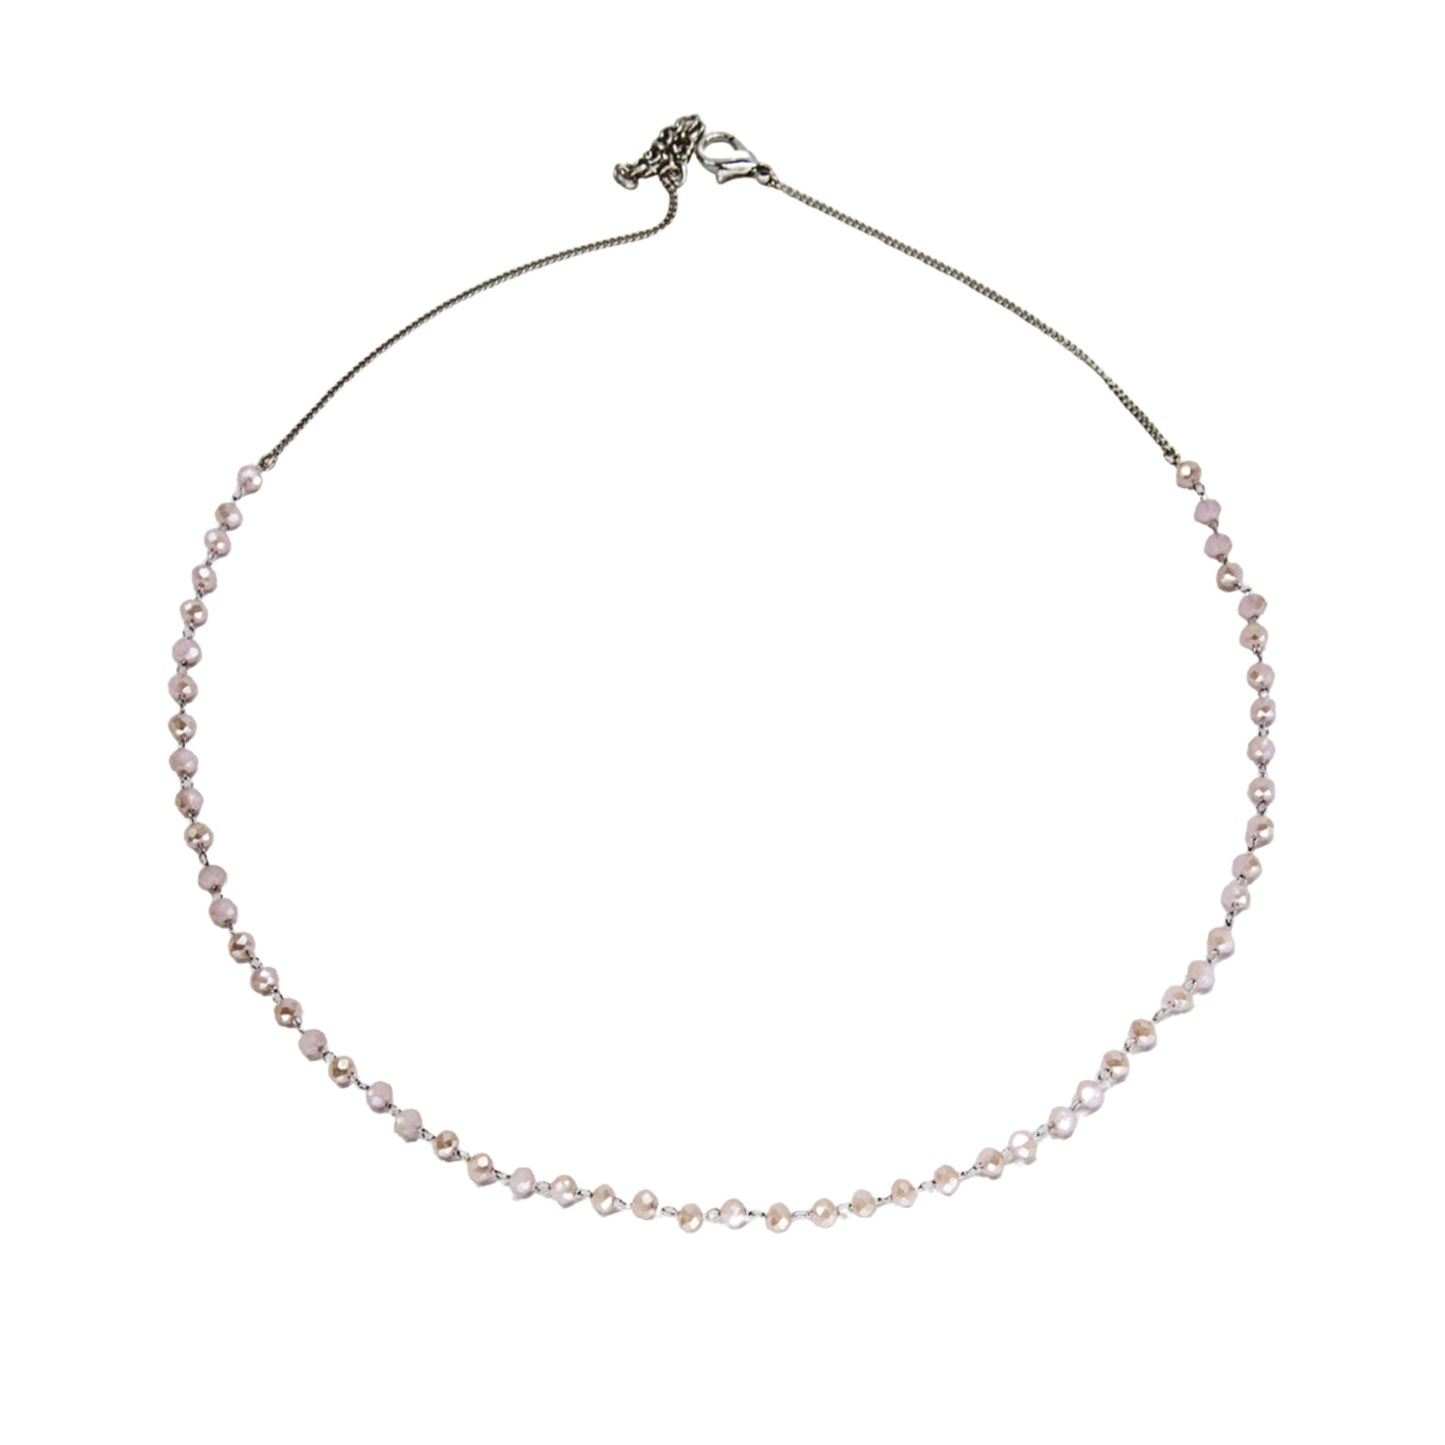 Delicate Crystal Bead Necklace - Shades of Cream